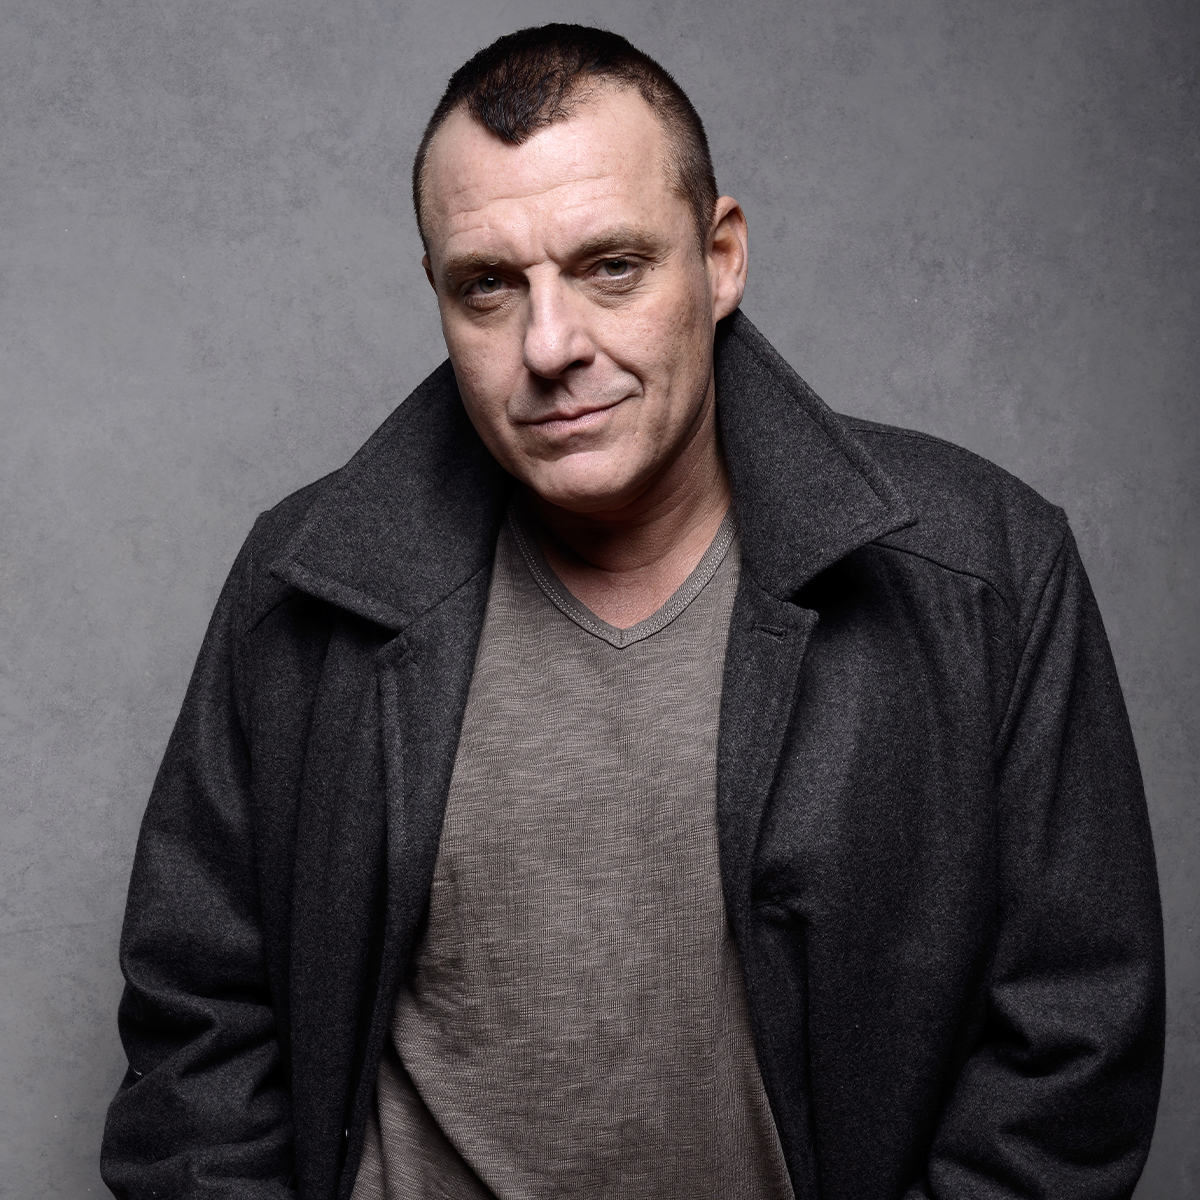 Tom Sizemore’s Family Is “Deciding End of Life Matters” After Brain Aneurysm and Stroke – E! Online